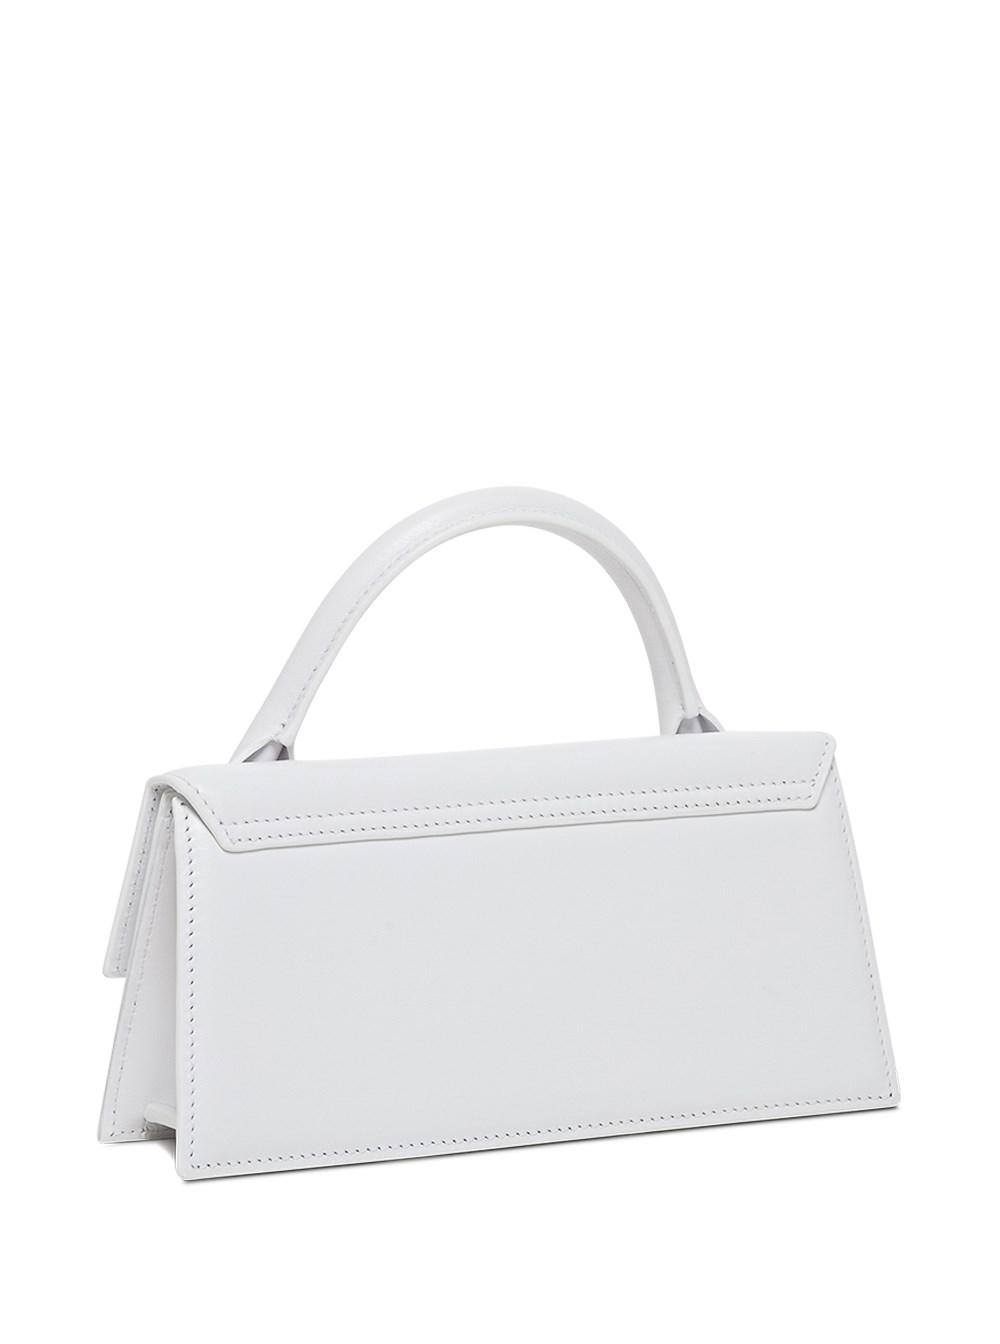 Jacquemus Le Chiquito Long in White